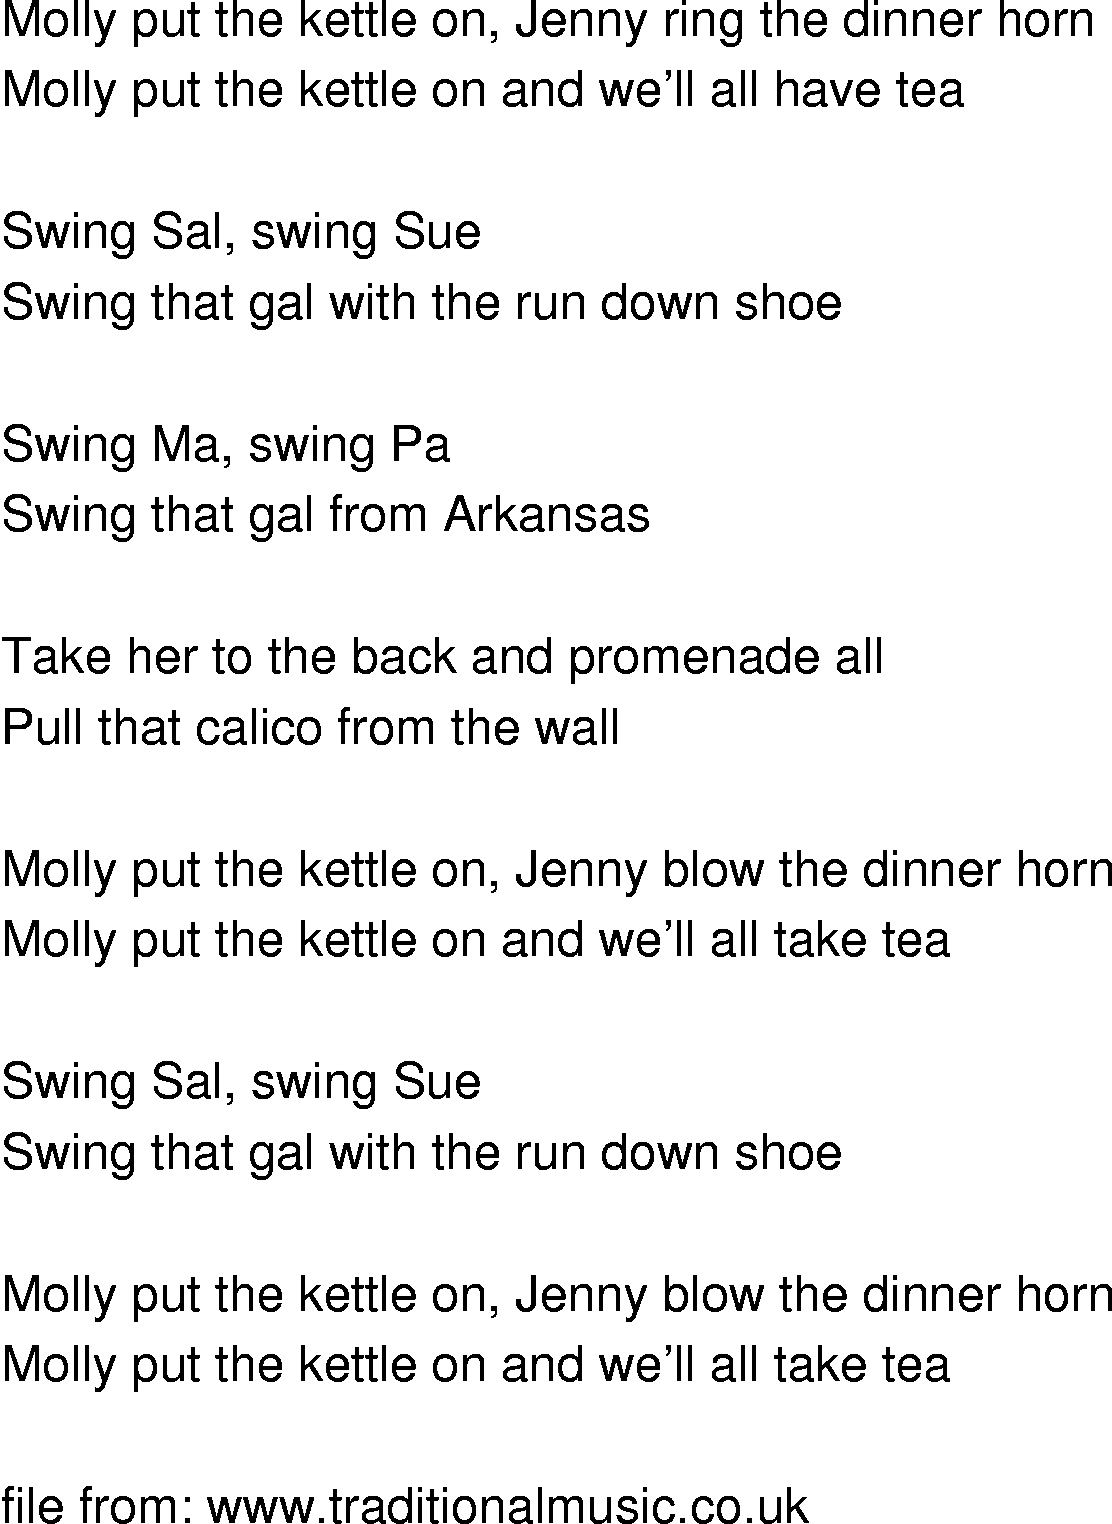 Old-Time (oldtimey) Song Lyrics - molly put the kettle on